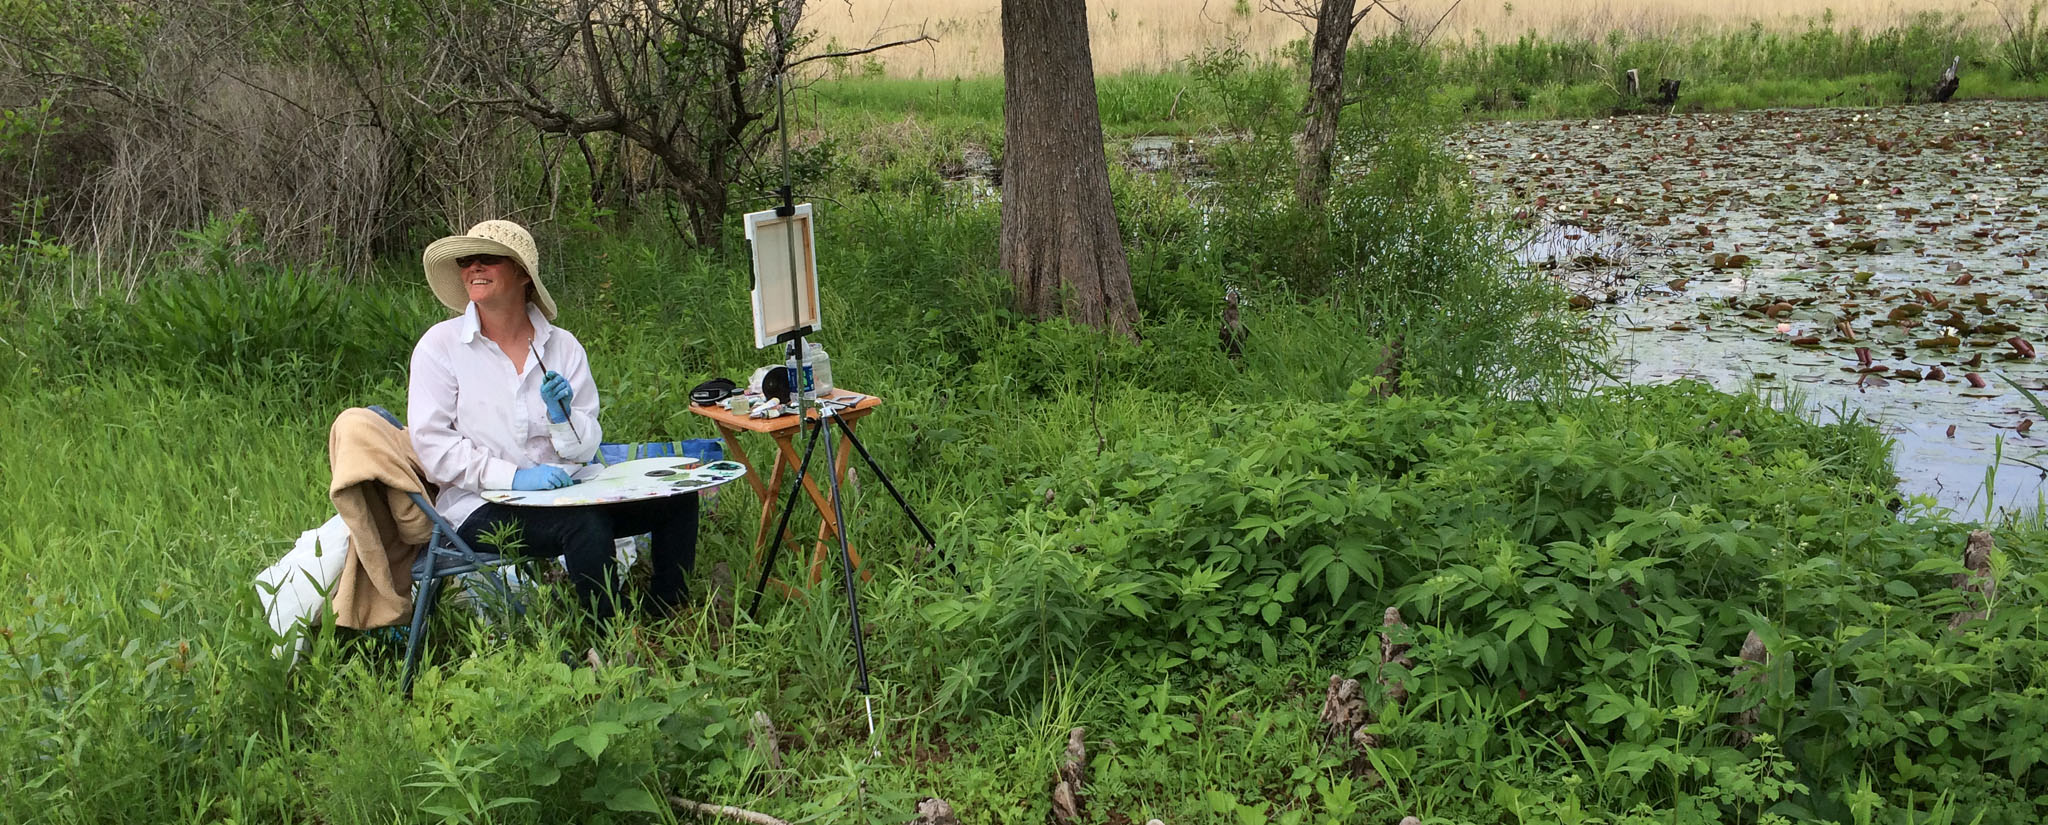 Plein Air Painting at the PGT_5213